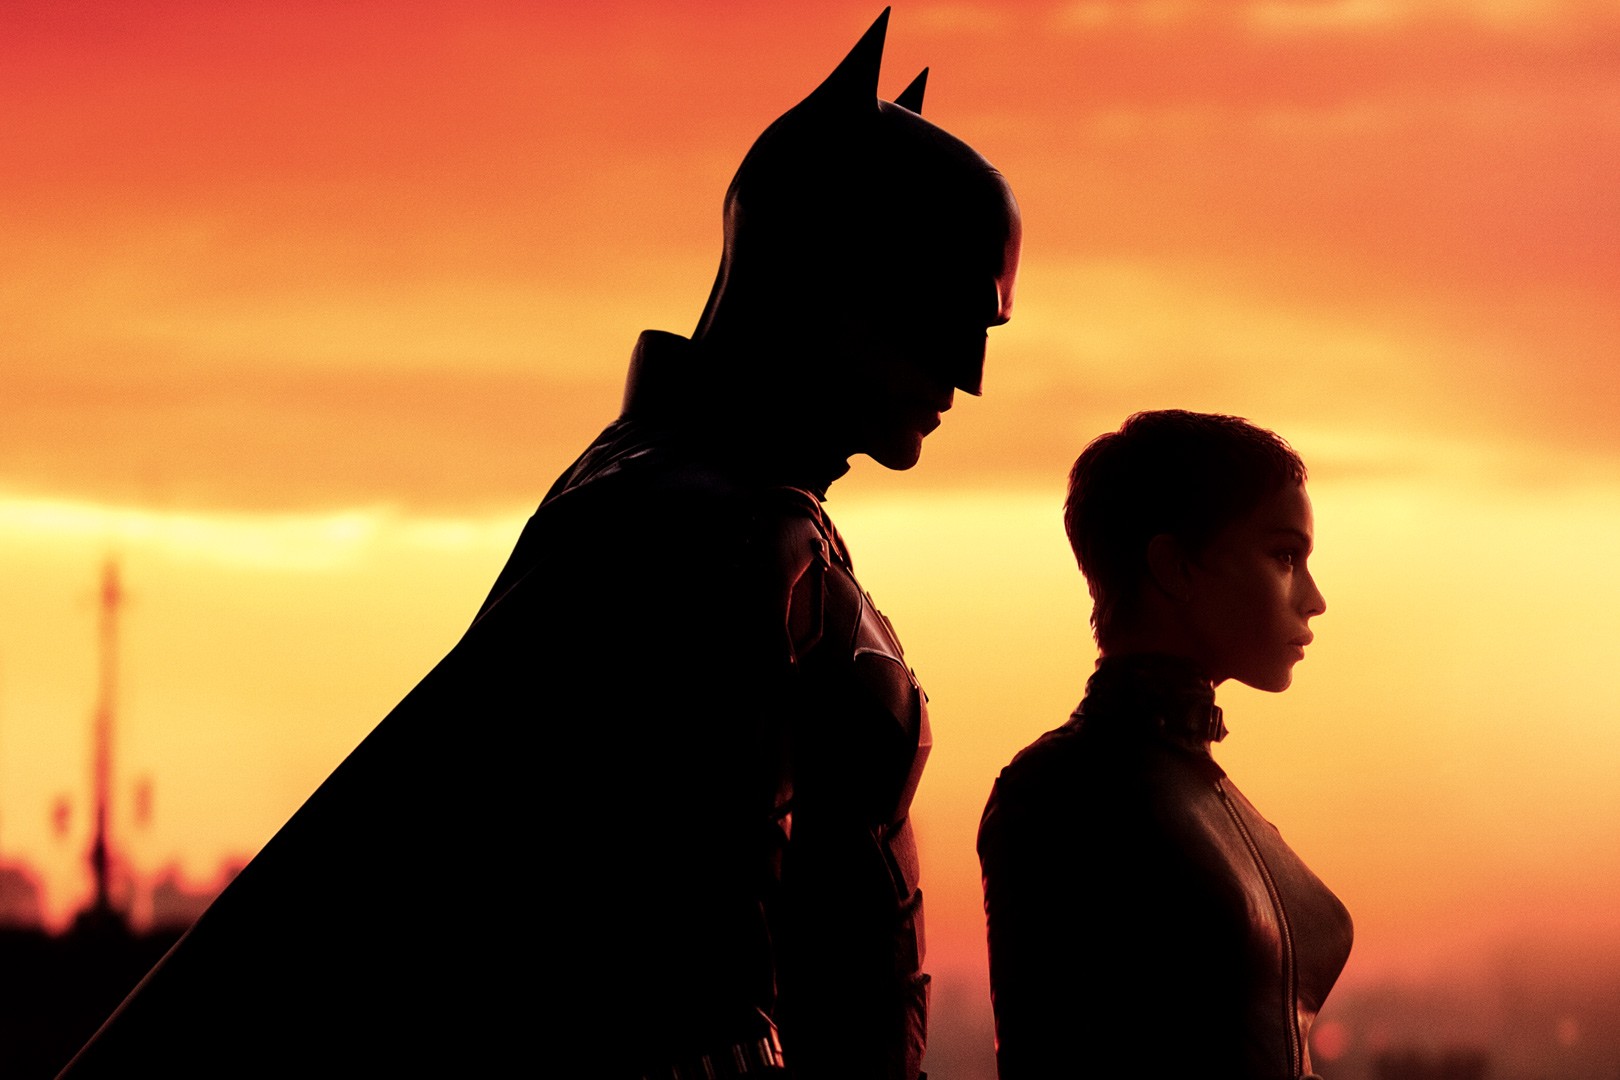 The Caped Crusader returns in the watchable but redundant The Batman |  Movie Reviews | Spokane | The Pacific Northwest Inlander | News, Politics,  Music, Calendar, Events in Spokane, Coeur d'Alene and